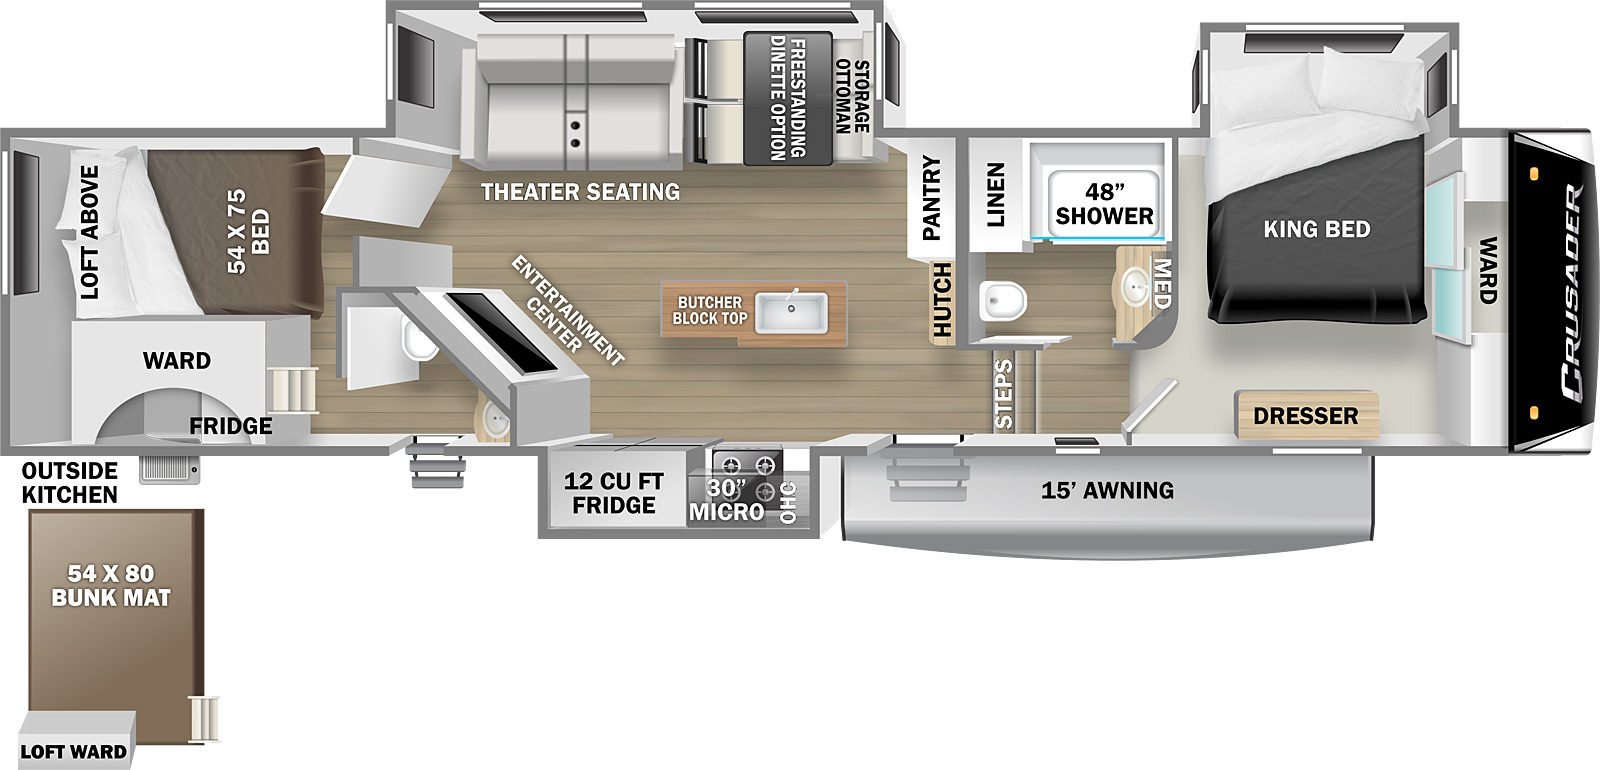 Crusader 395BHL floorplan. The 395BHL has 3 slide outs and two plus entry doors.